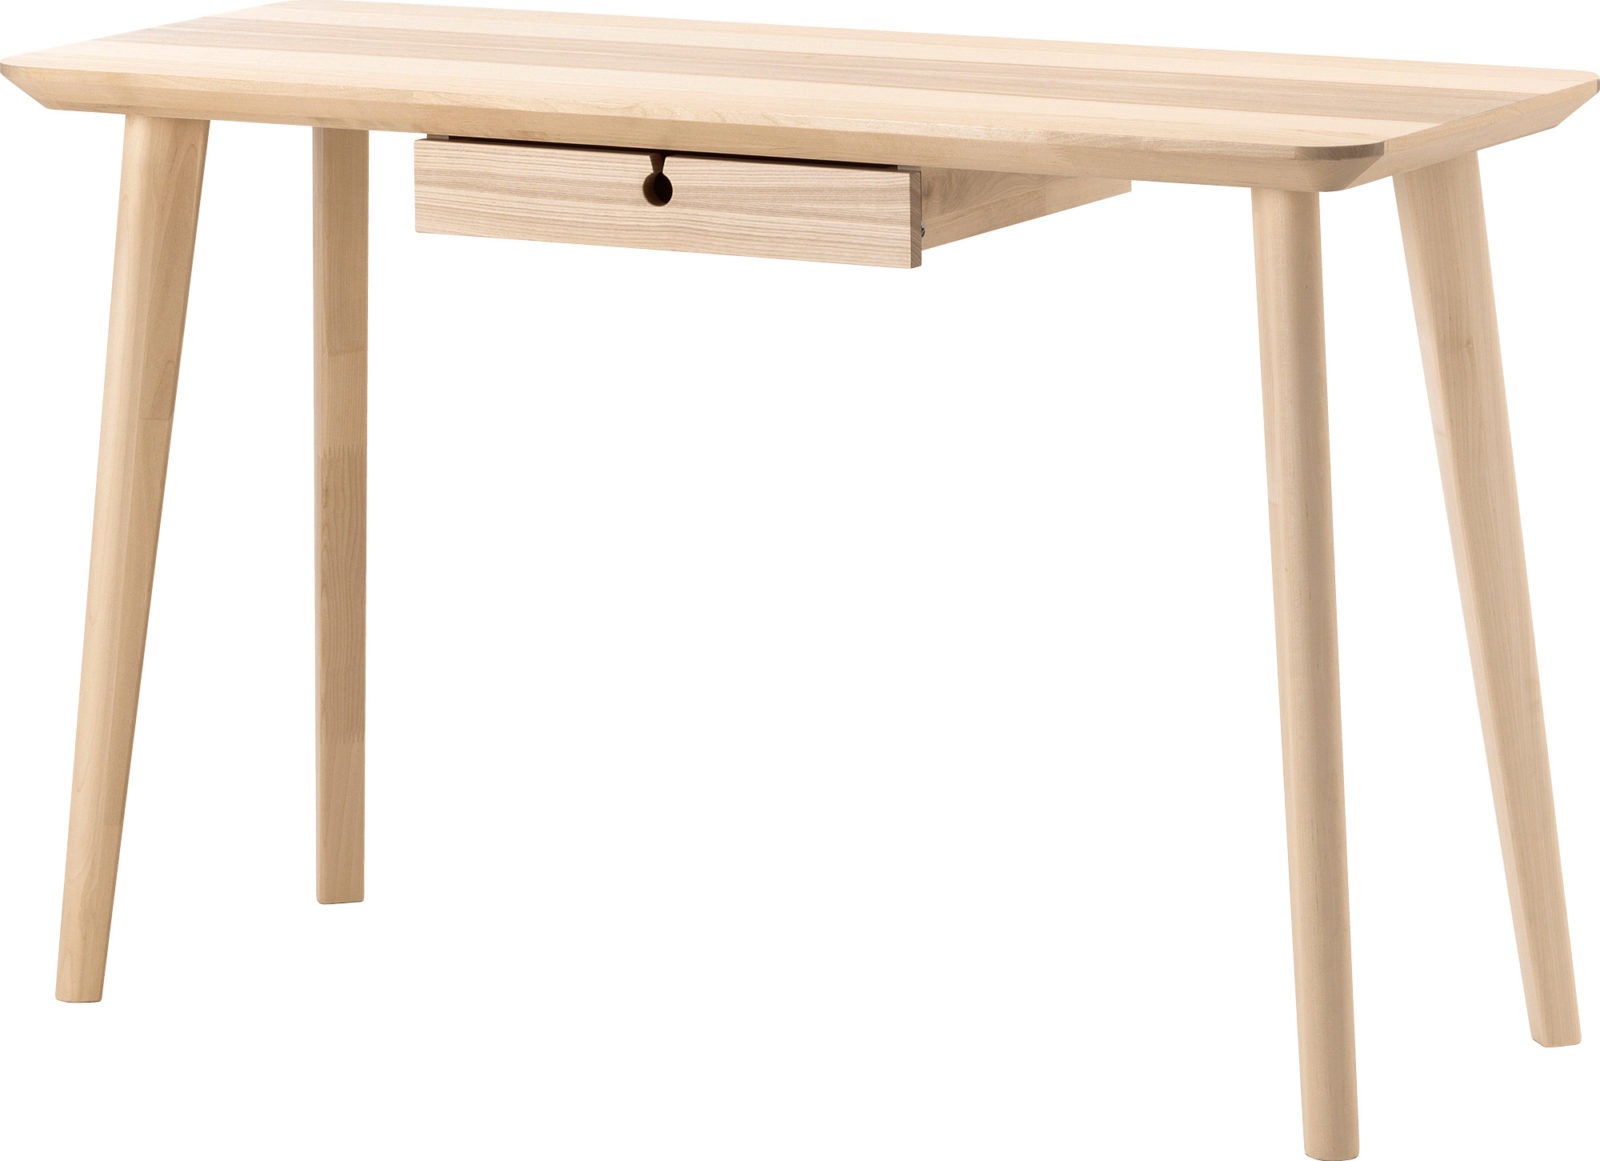 Clean-lined desk with one drawer, birch legs and a solid ash-veneered beech top, LISABO.